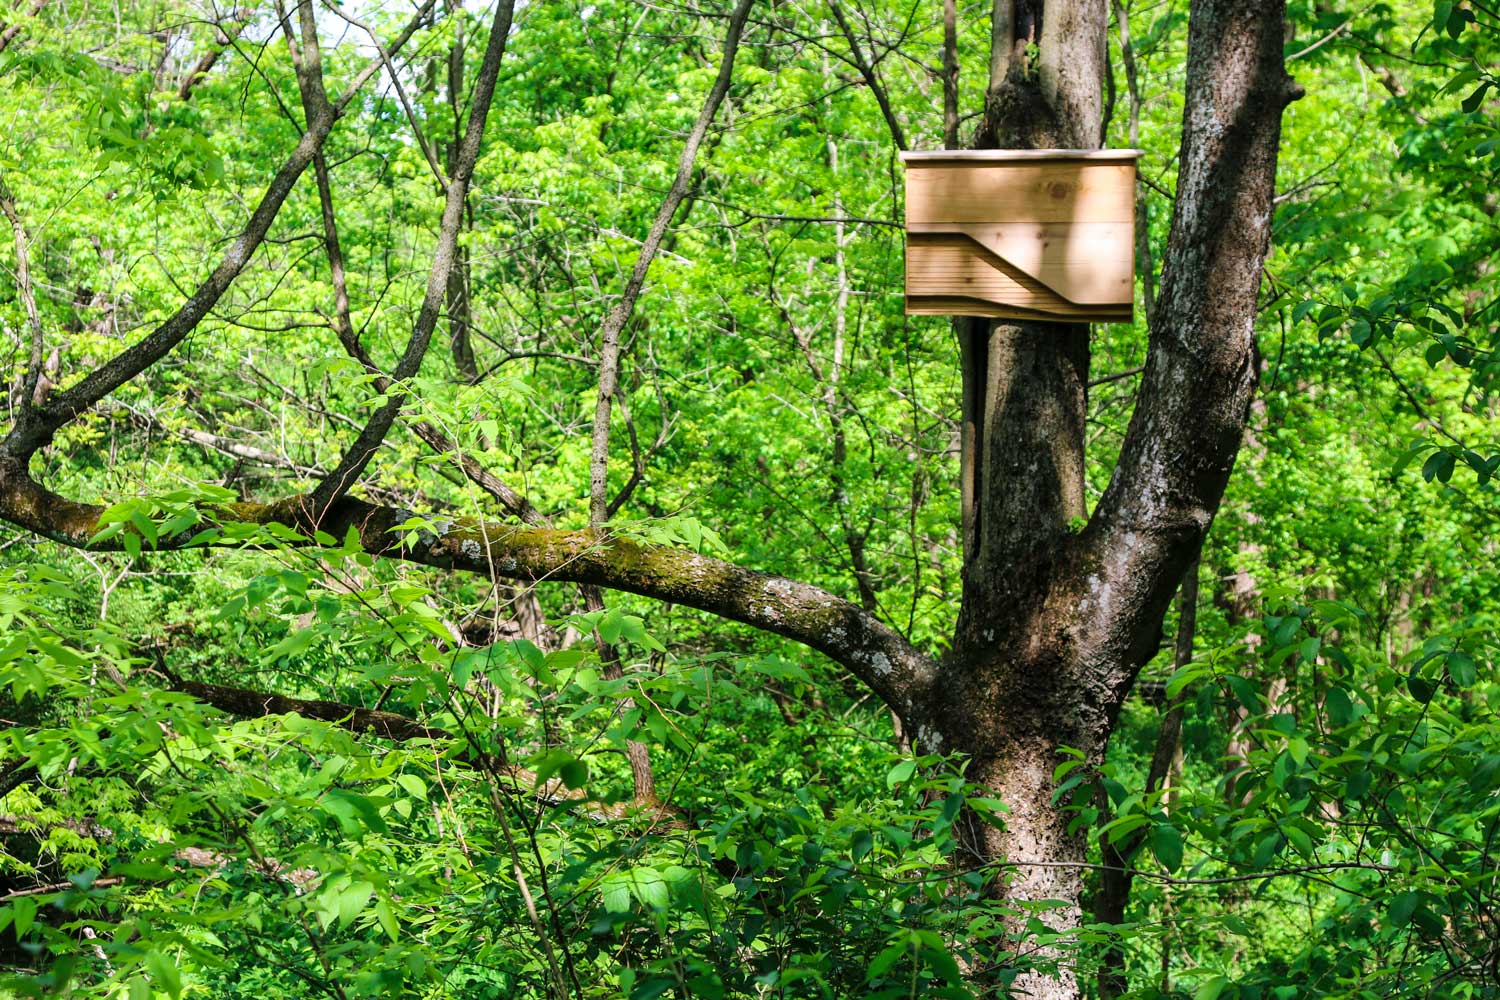 The bat houses in a tree